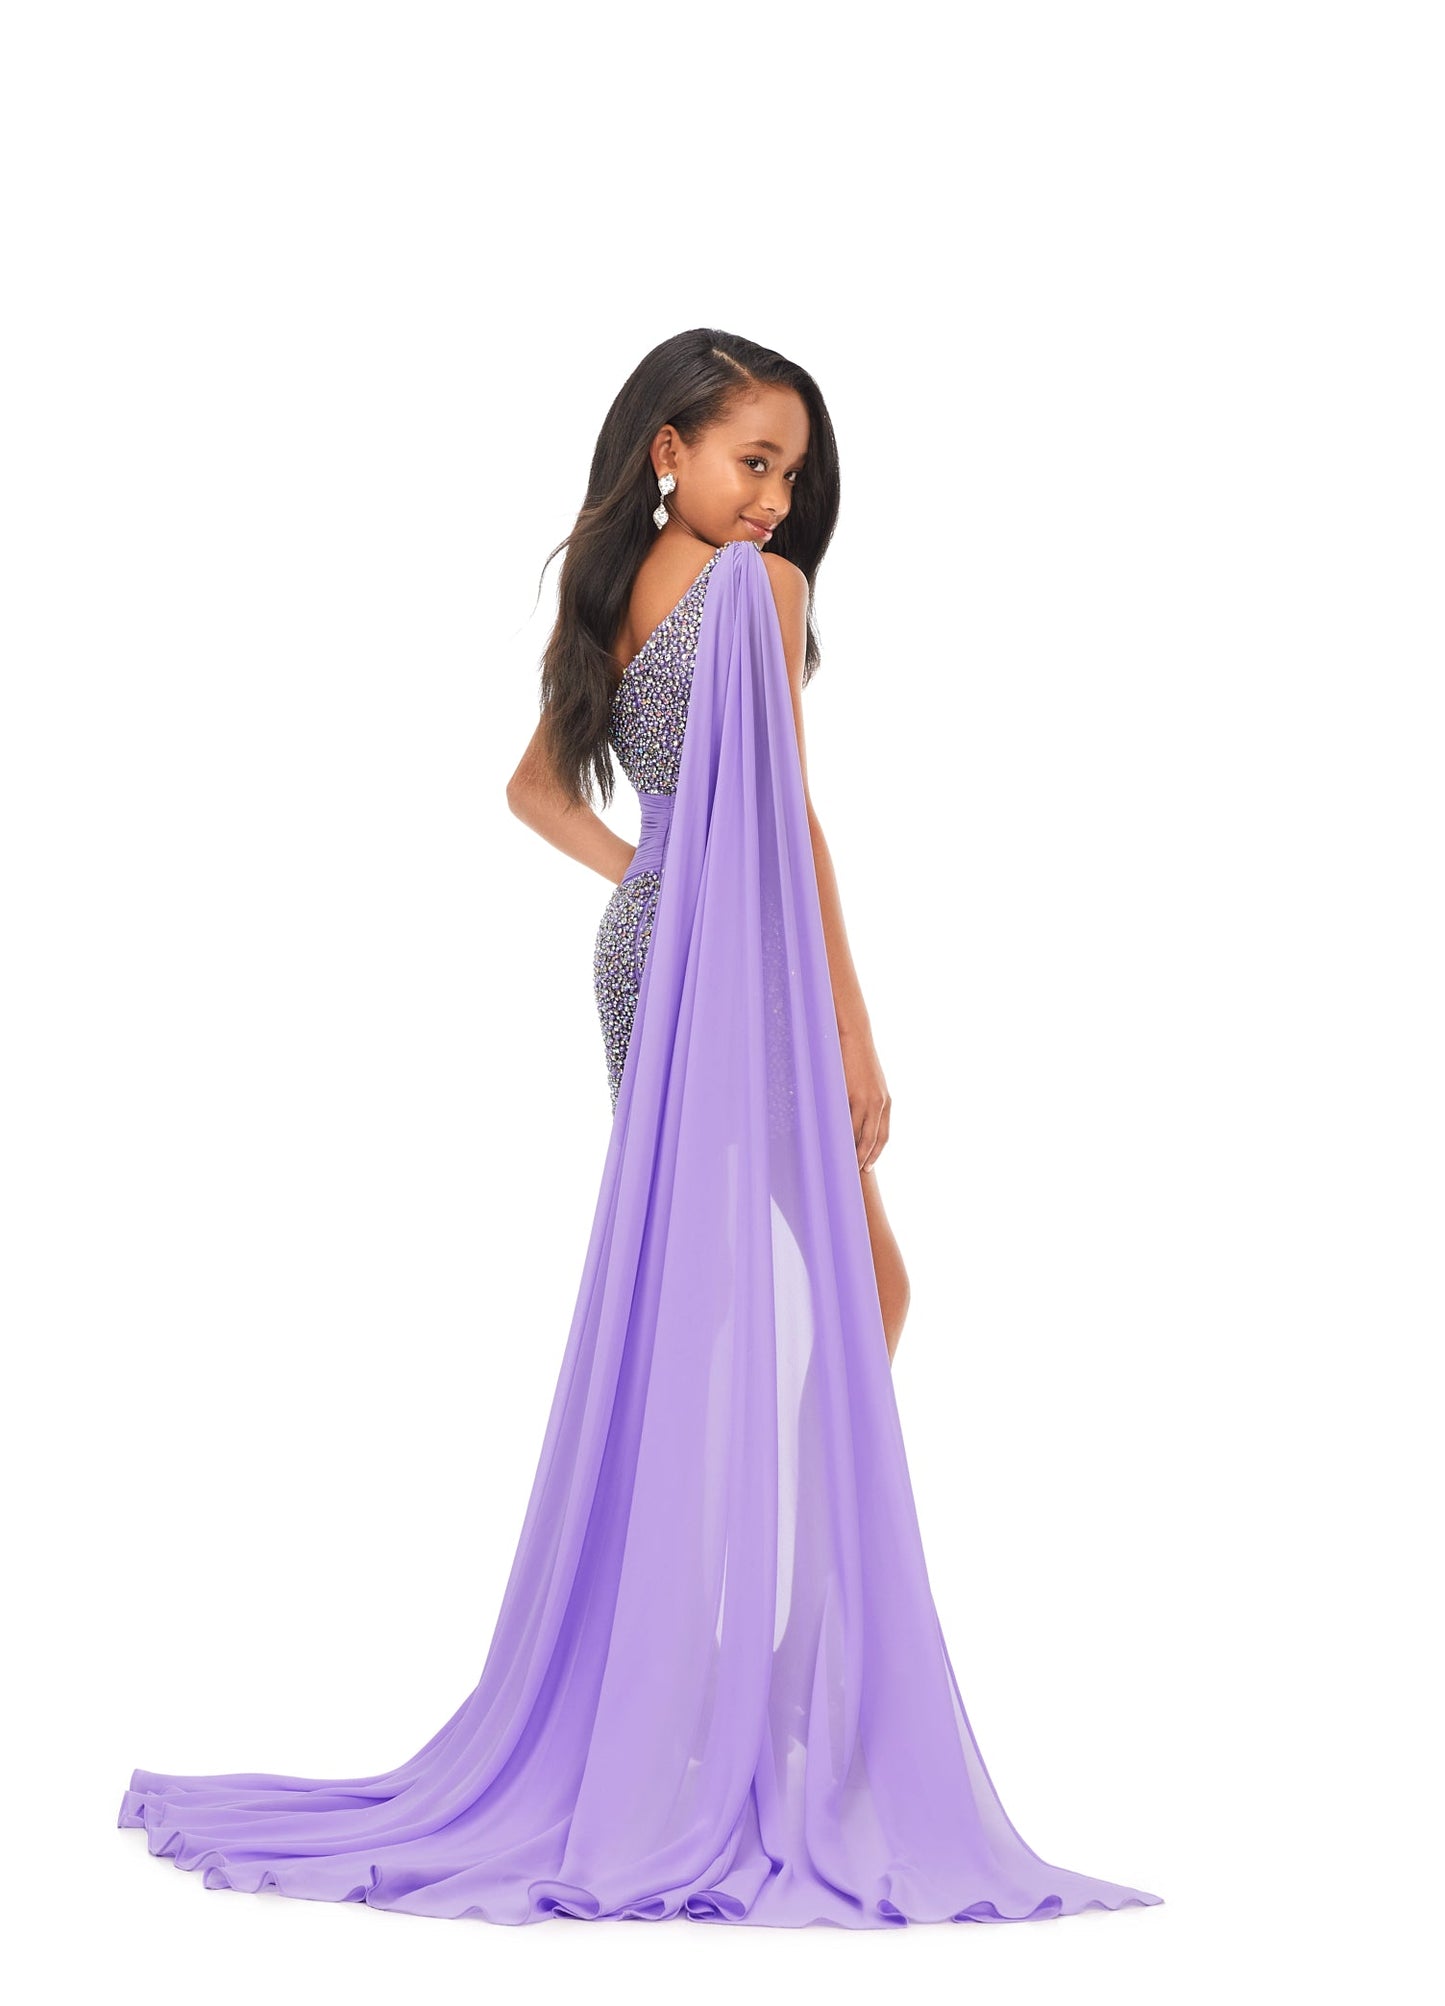 Ashley Lauren Kids 8151 One Shoulder Crystal Beaded Romper Chiffon Cape Pageant Fun Fashion This stunning kids one shoulder romper features pearls and crystals throughout. The look is completed with an attached chiffon shoulder cape. One Shoulder Chiffon Cape Romper COLORS: Orchid, Yellow, Neon Pink, Light Blue Sizes: 2,4,6,8,10,12,14,16